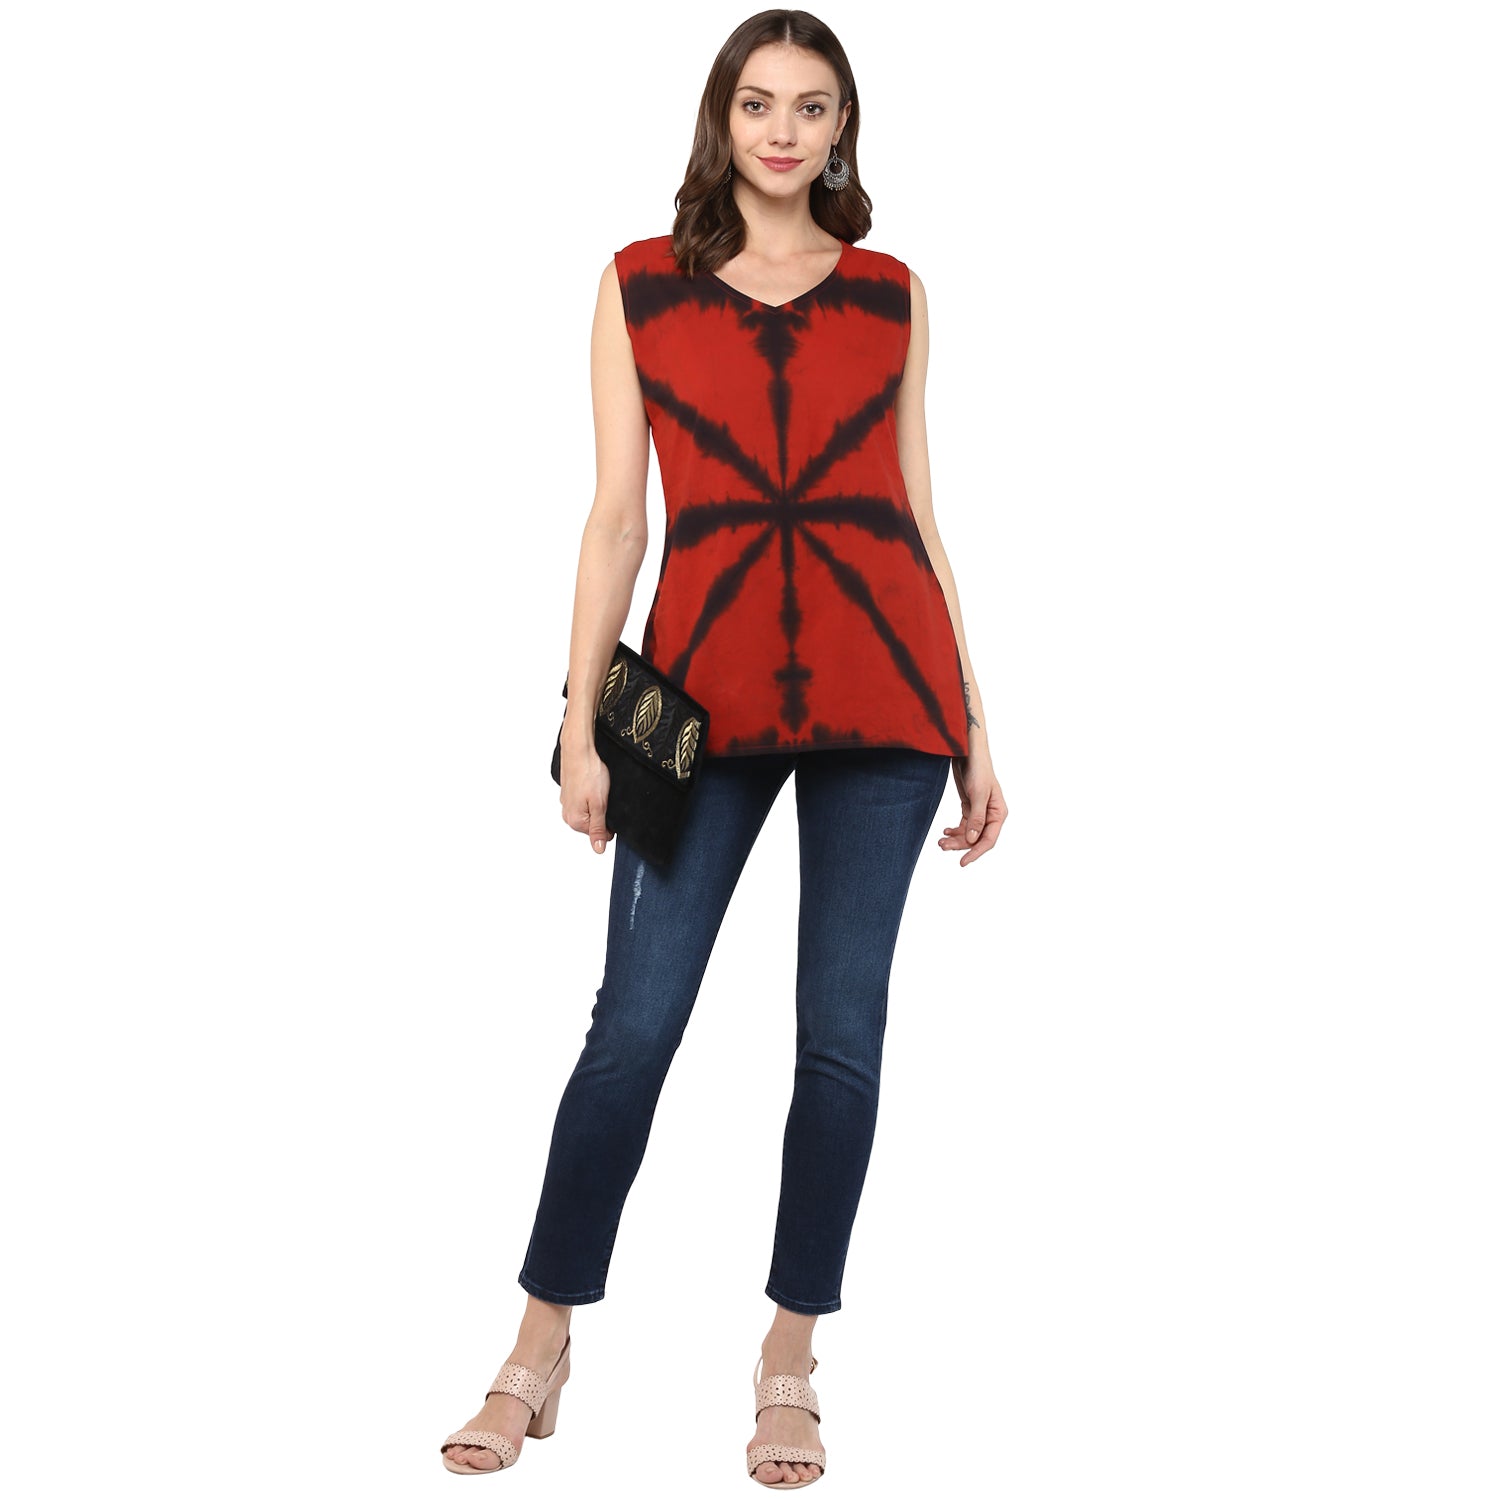 Red Top For Women Online